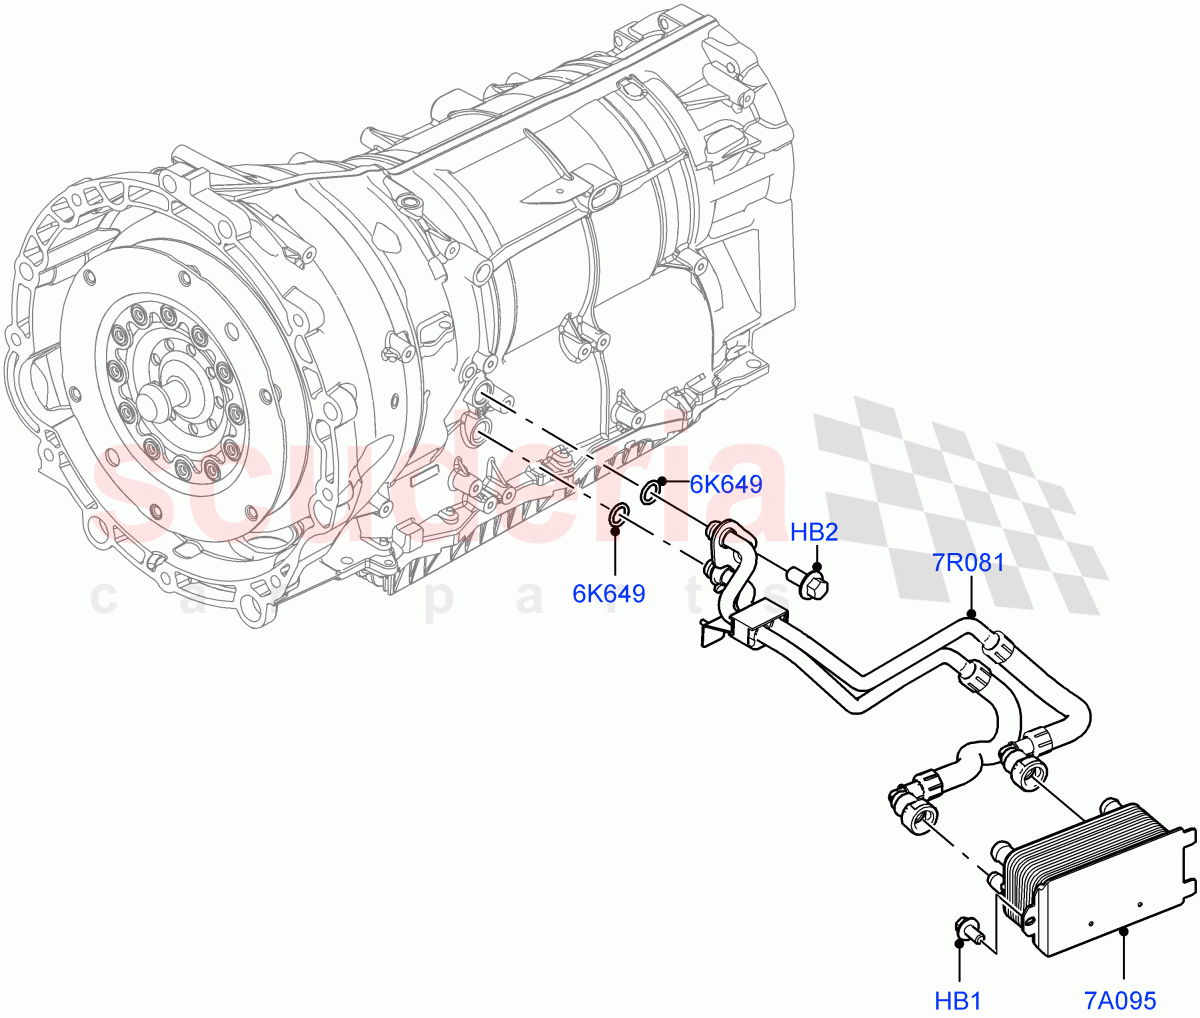 Transmission Cooling Systems(3.0L AJ20P6 Petrol High,8 Speed Auto Trans ZF 8HP76,3.0L AJ20D6 Diesel High)((V)FROMKA000001) of Land Rover Land Rover Range Rover (2012-2021) [4.4 DOHC Diesel V8 DITC]